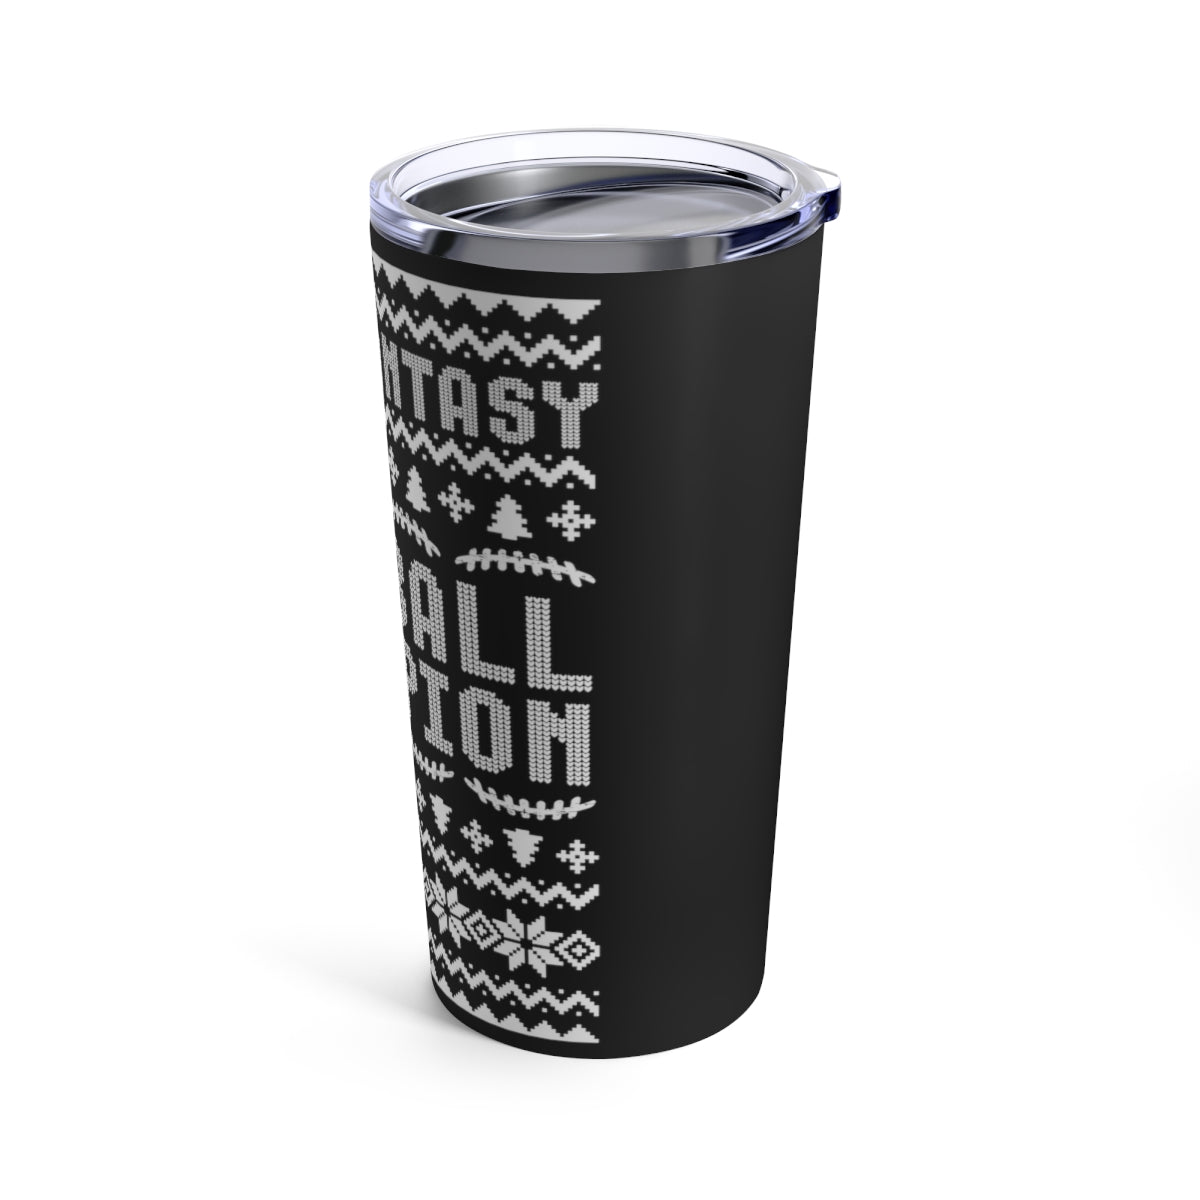 2022 Fantasy Football Champion Ugly Holiday Christmas Champ Tumbler 20oz Beverage Container